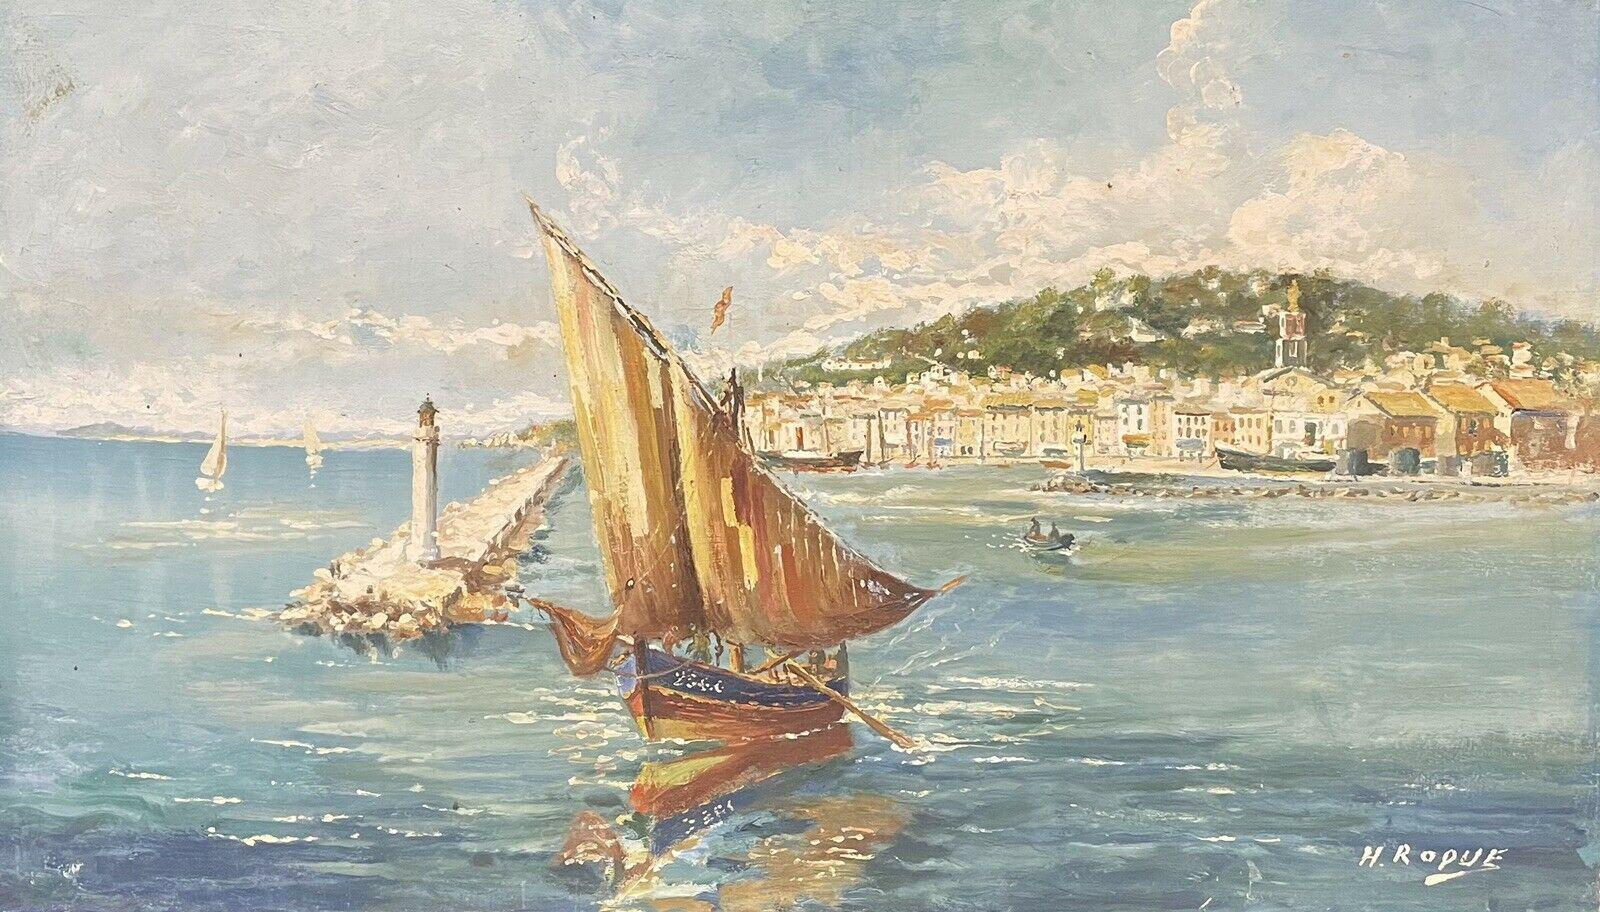 Jason Bentham Dinsdale Landscape Painting - LARGE VINTAGE FRENCH SIGNED OIL - SAILING BOATS ON THE MED FRENCH RIVIERA COAST